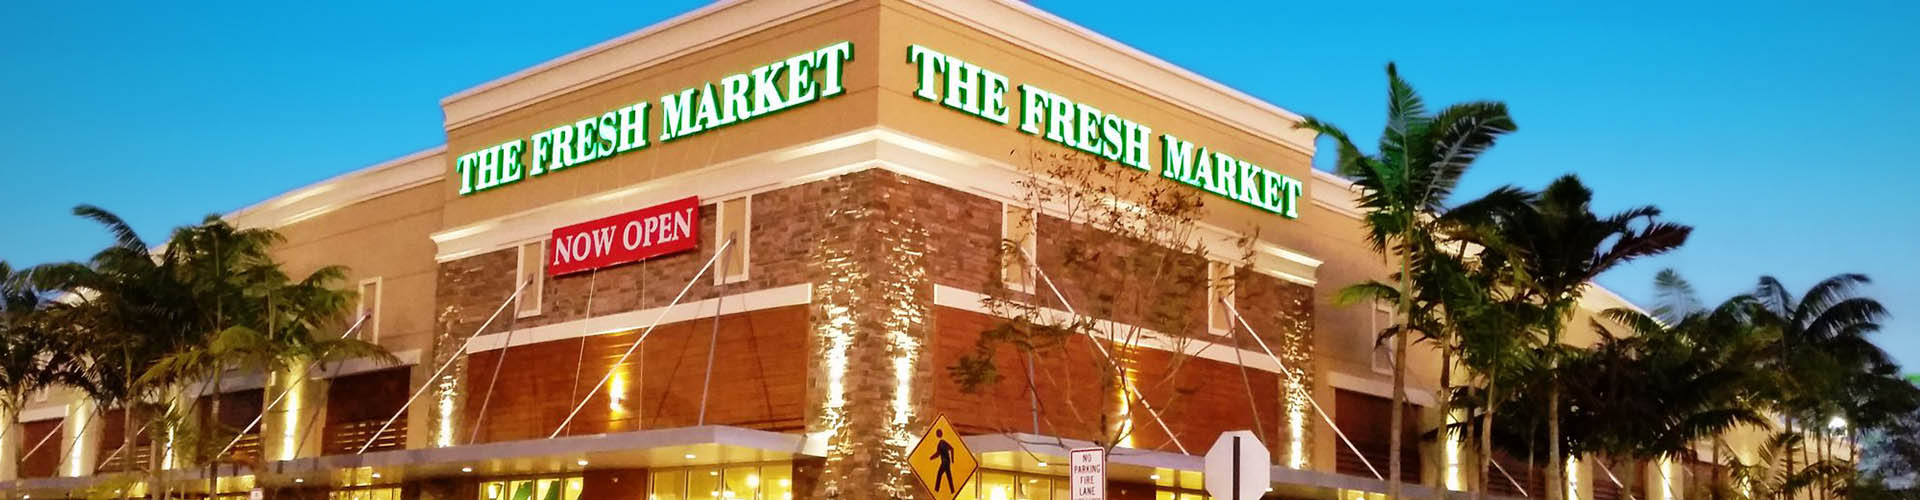 The Fresh Market Commercial Plumbing Project